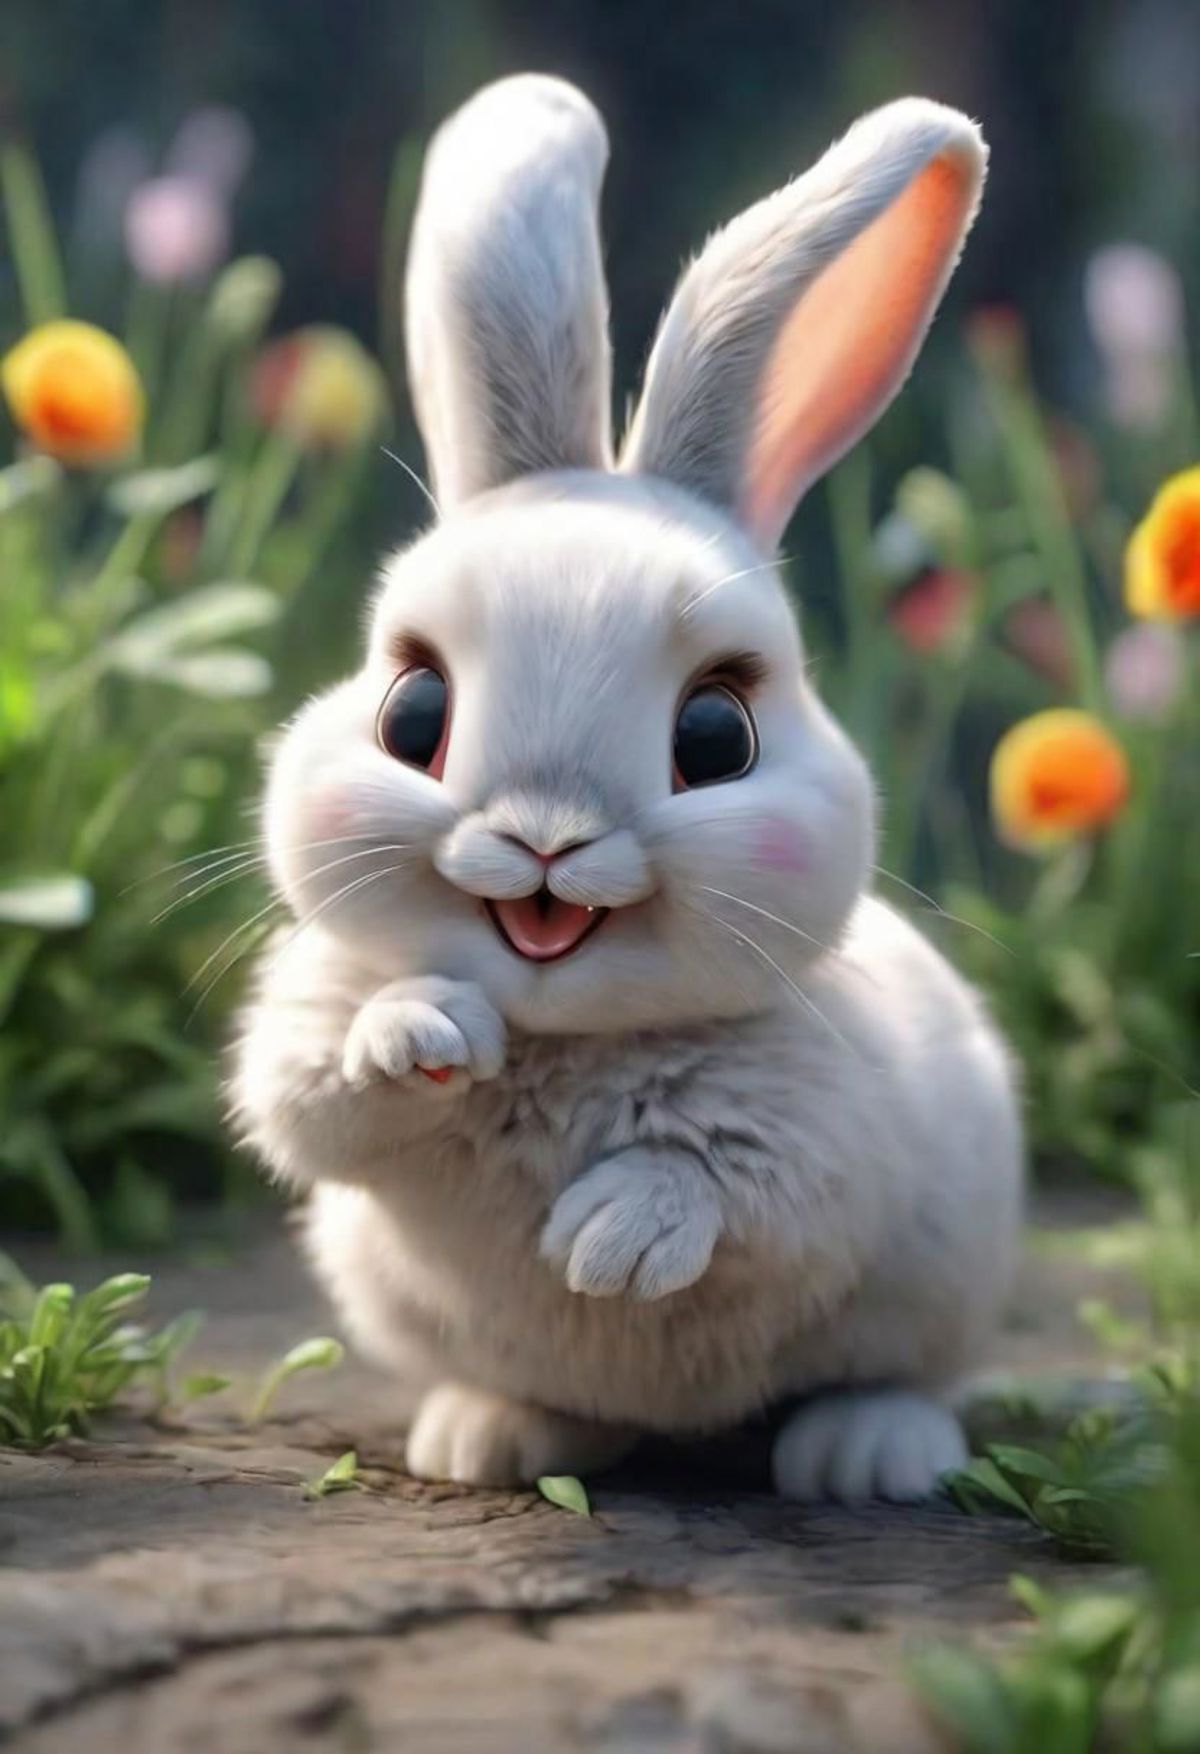 Adorable White Bunny Rabbit with Pink Nose and Eyes in a Field of Flowers.